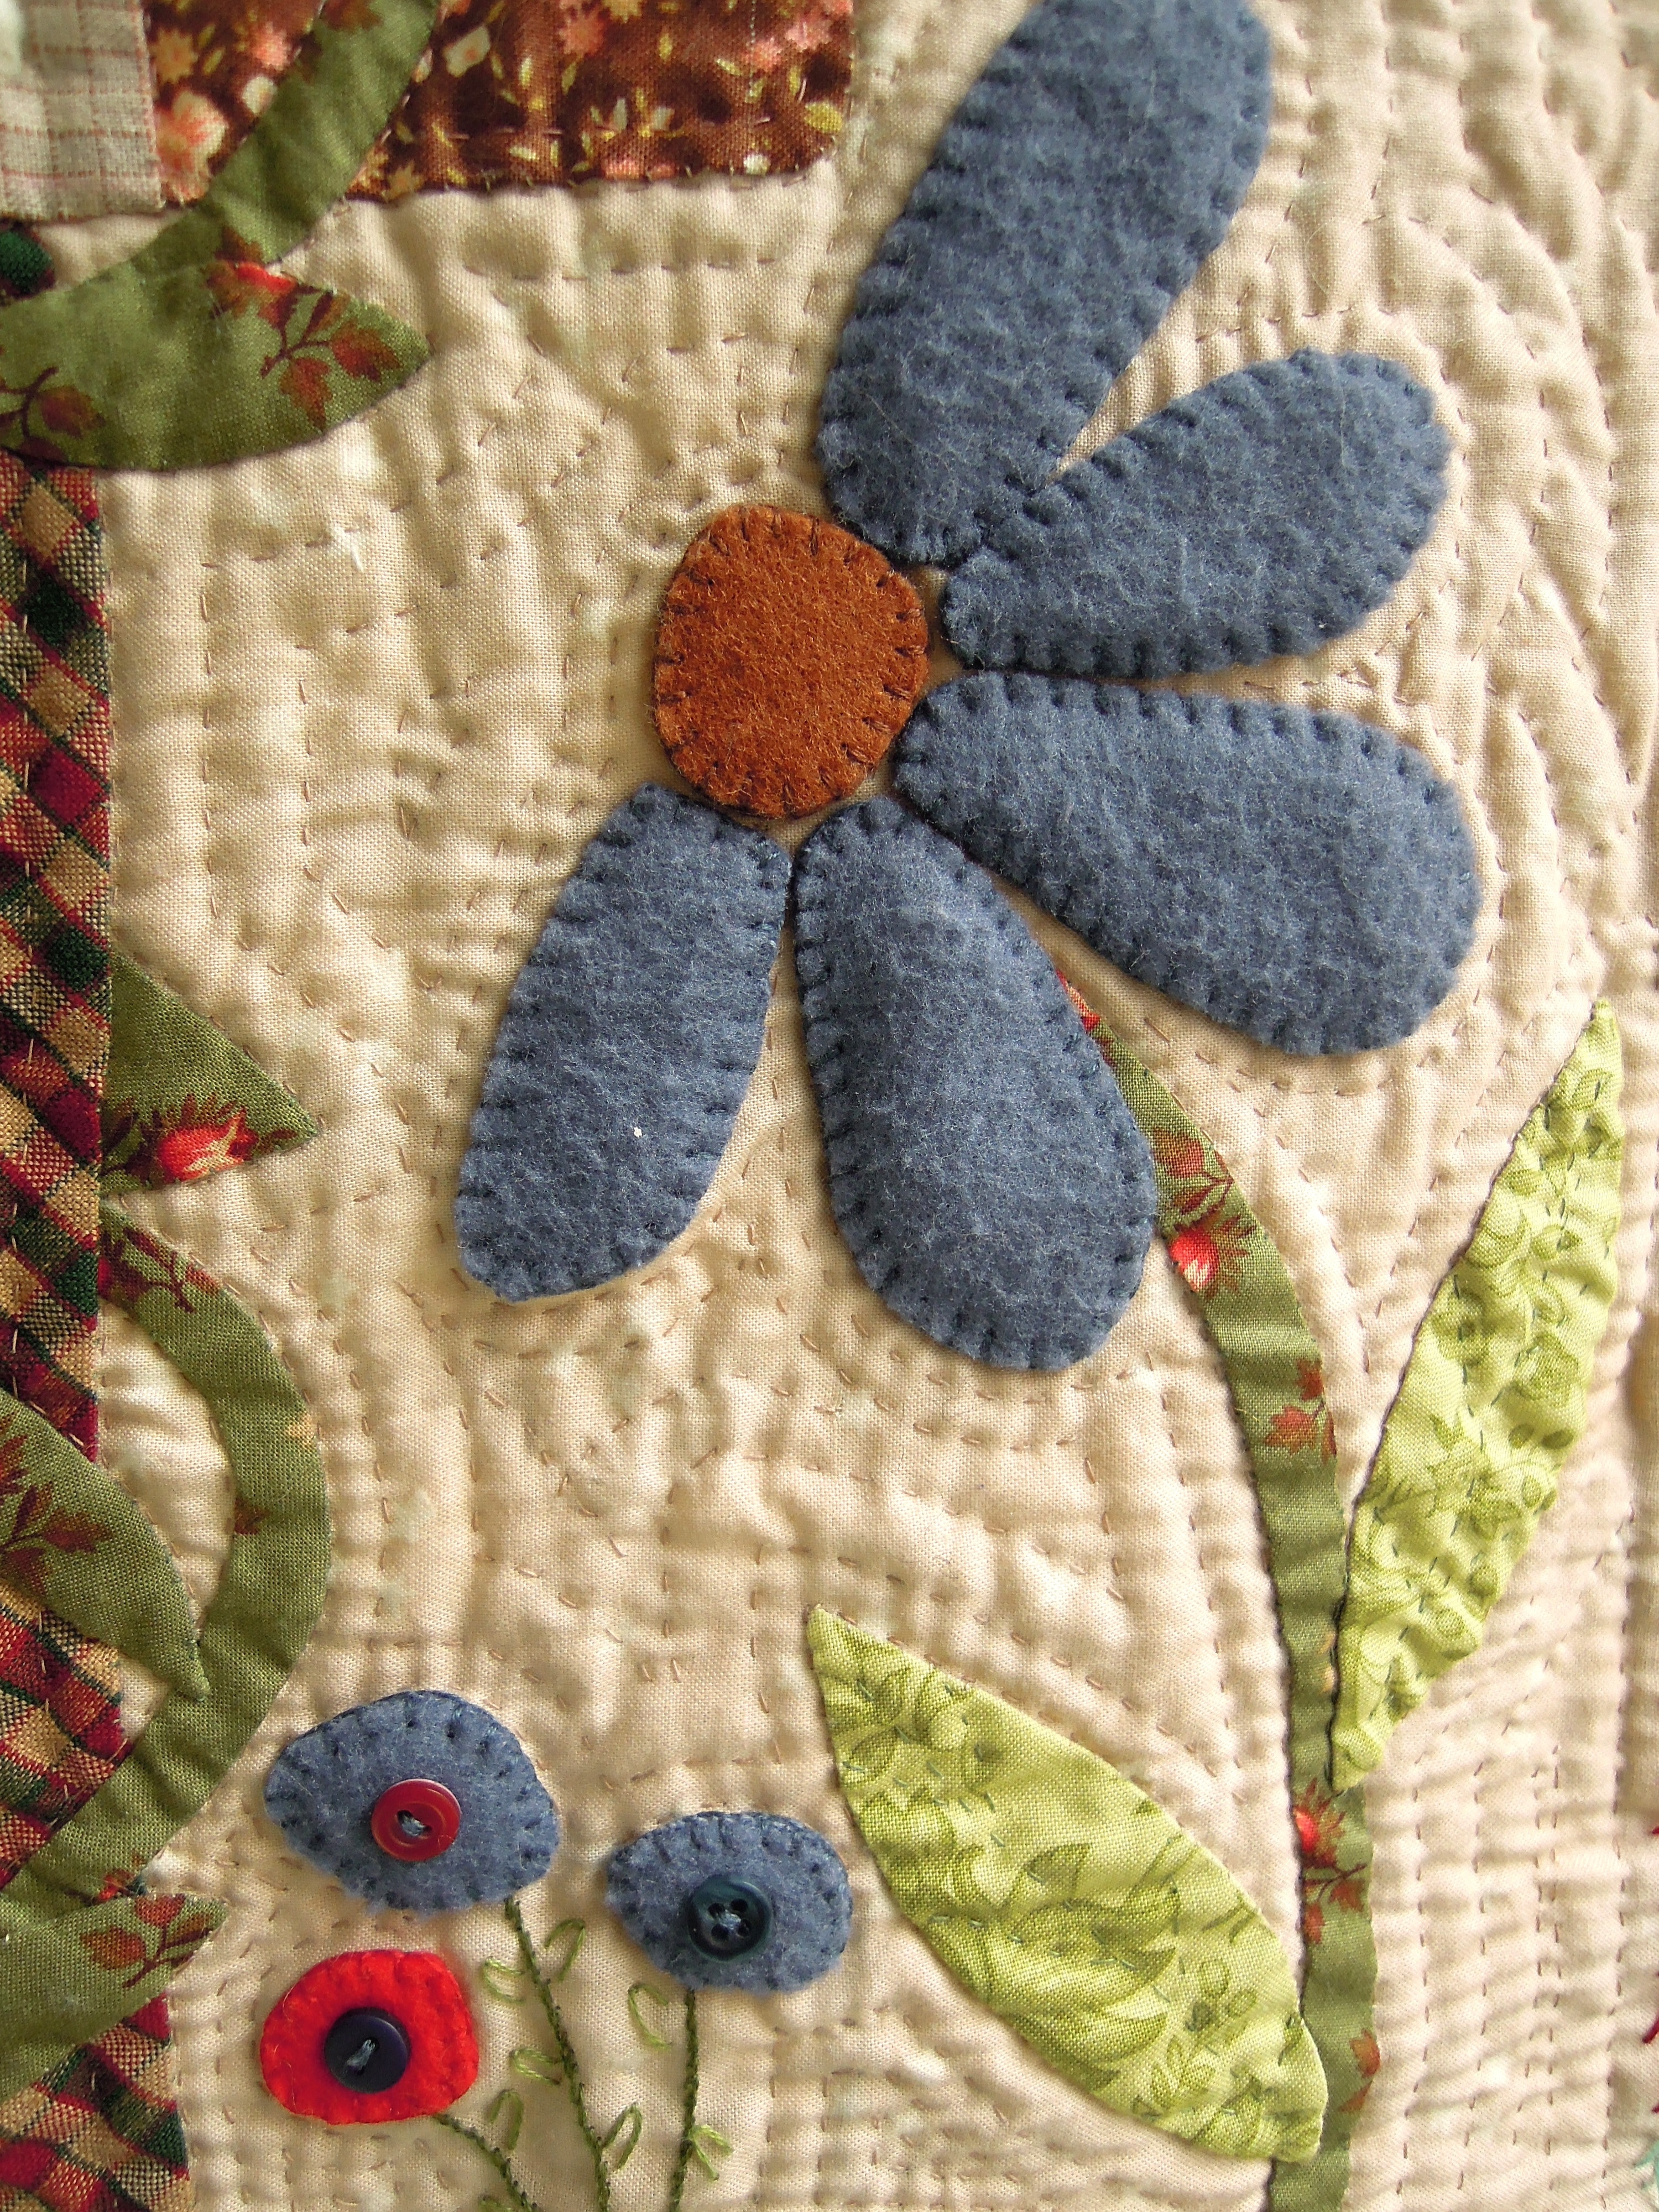 Fabric Flower, Sewing, Patchwork, Work, wool, art and craft